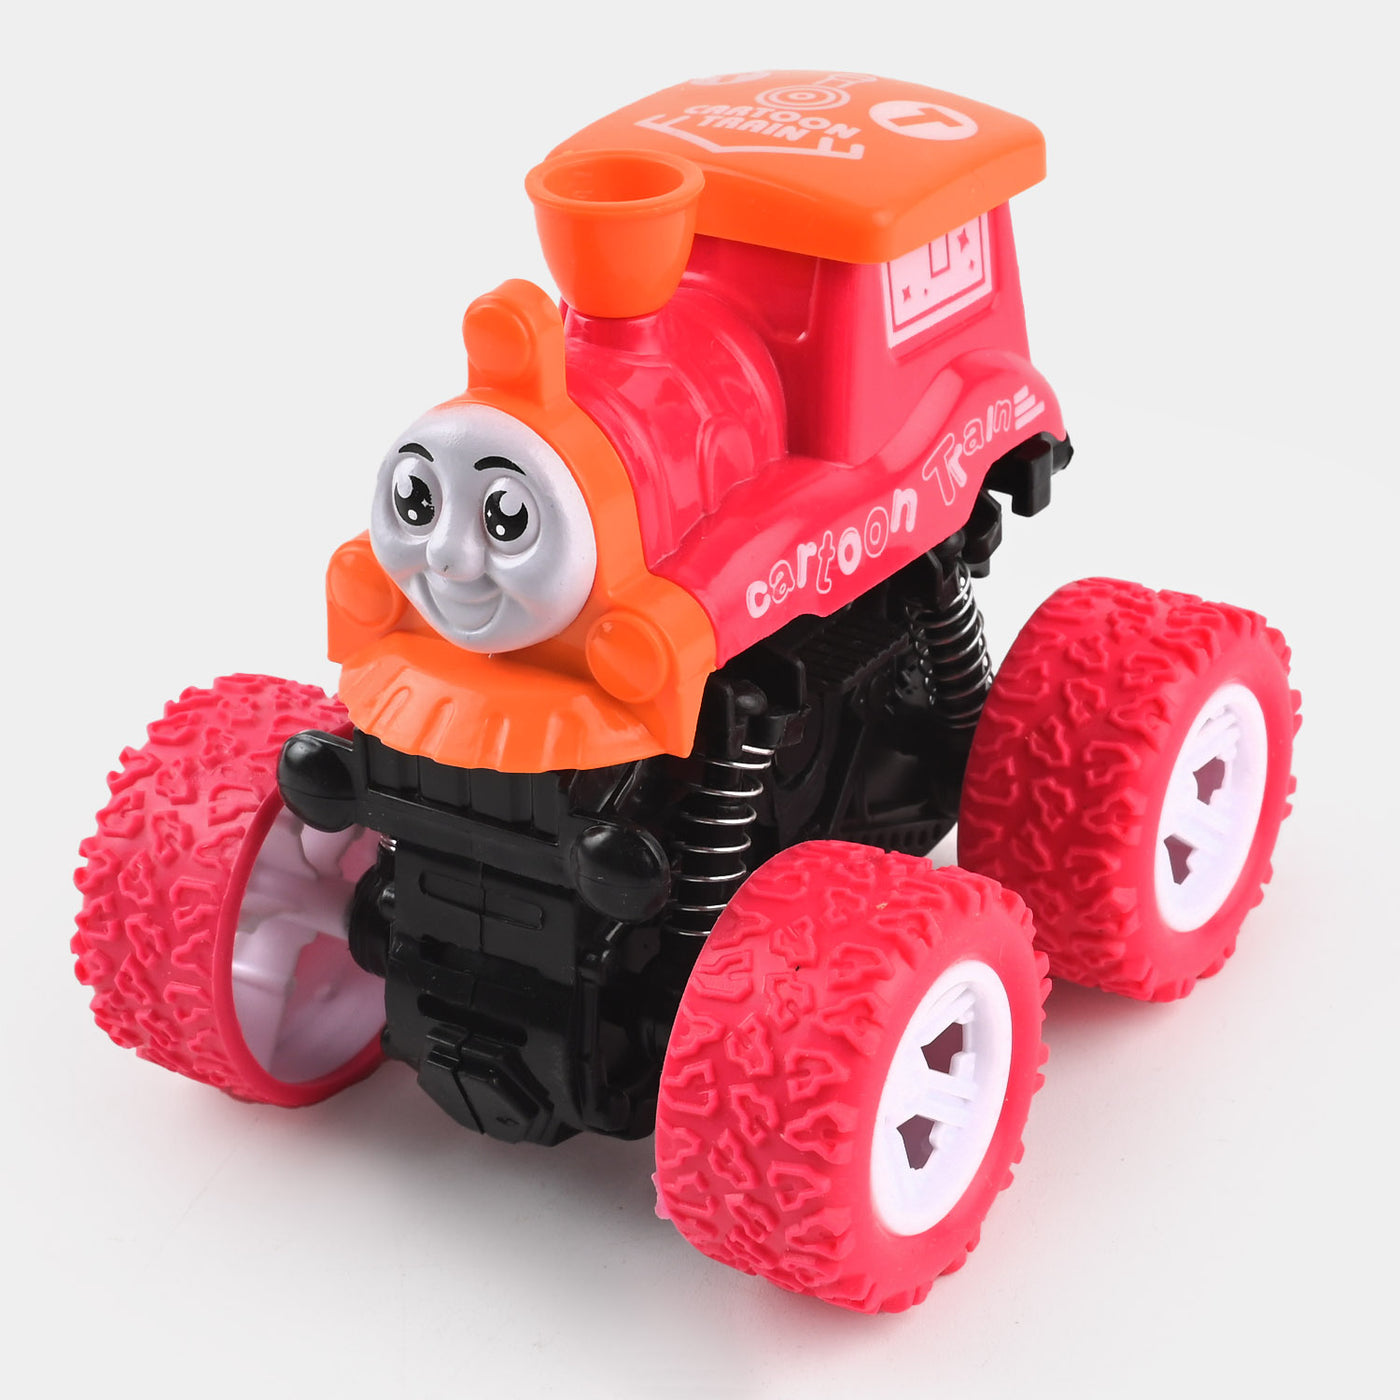 COLORFUL FRICTION POWERED TRAIN PULL ALONG TOY FOR KIDS